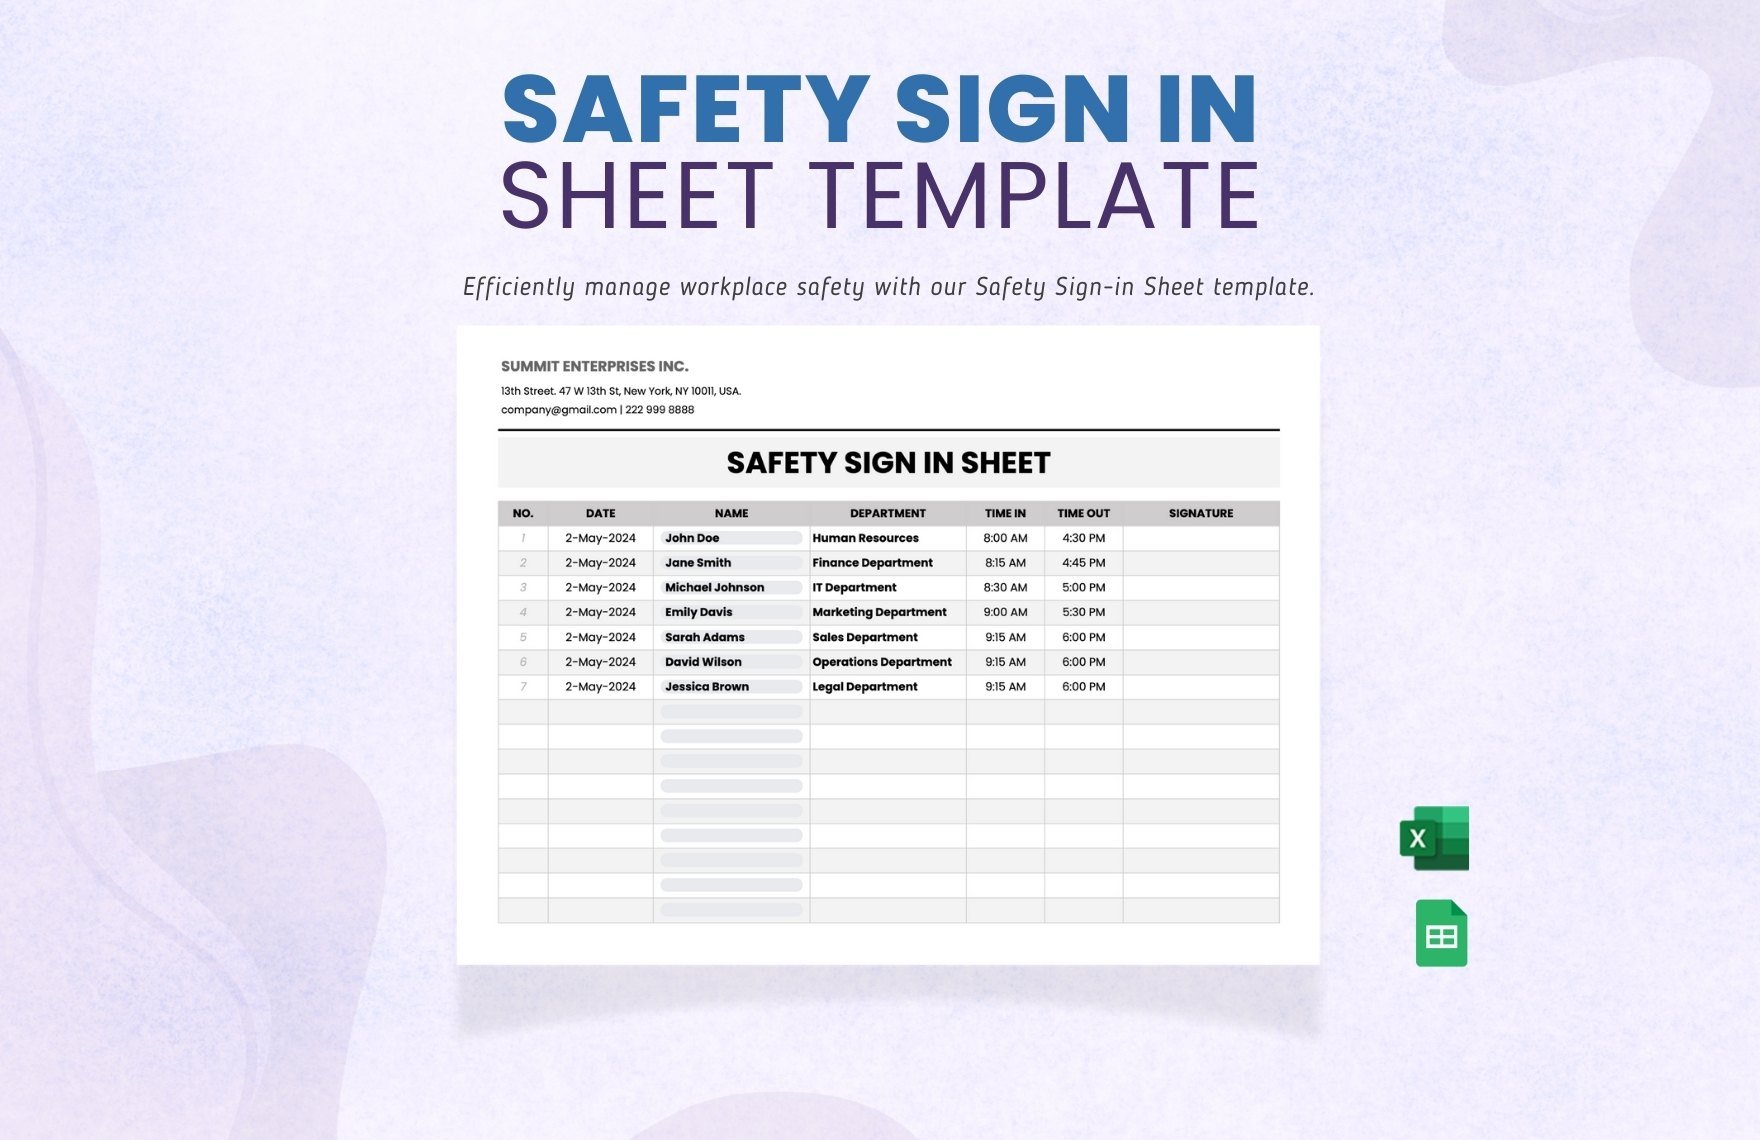 Safety Sign in Sheet Template in Excel, Google Sheets